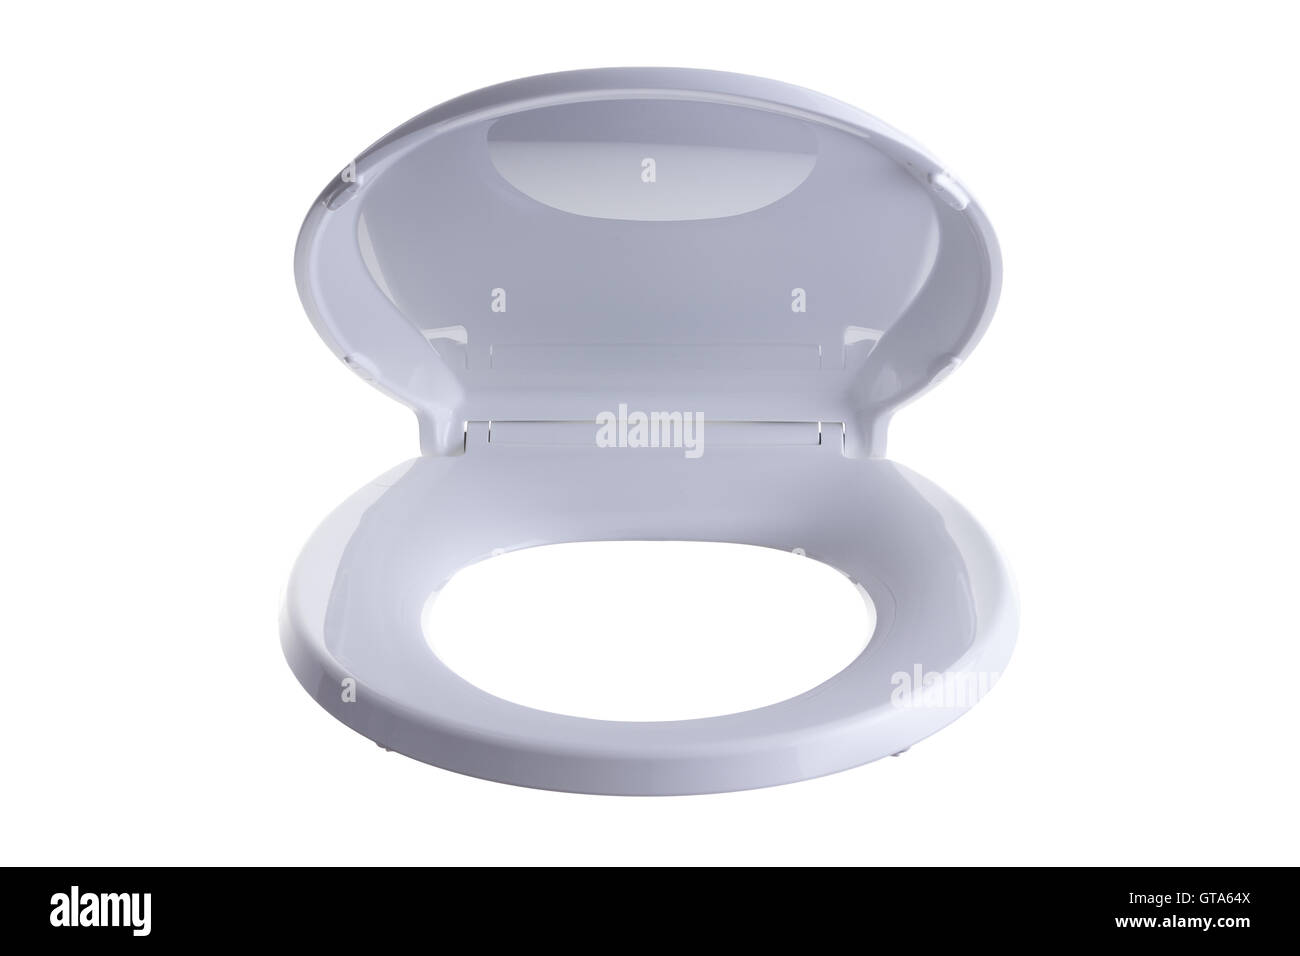 Partially opened isolated generic white plastic hinged toilet seat and lid viewed from the front Stock Photo